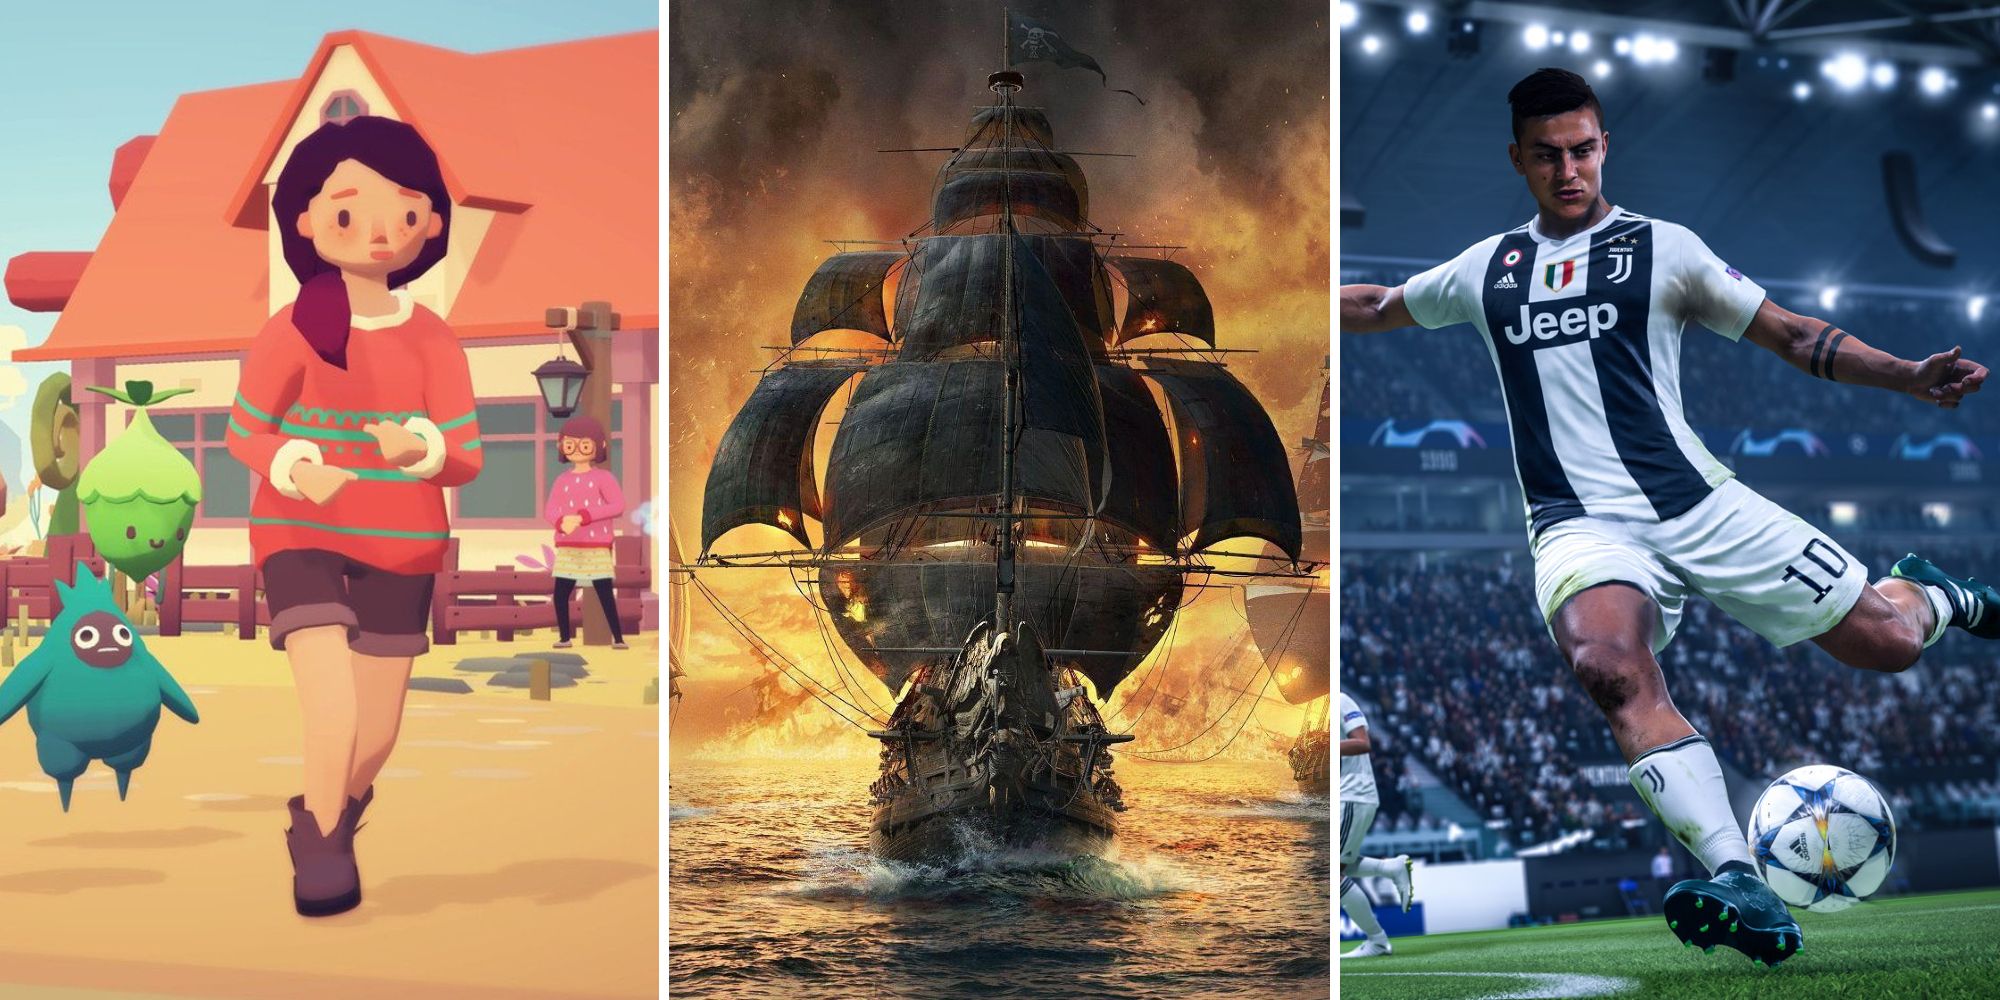 Main character from Ooblets, a ship fom Skull and Bones, and Paulo Dybala from FIFA.